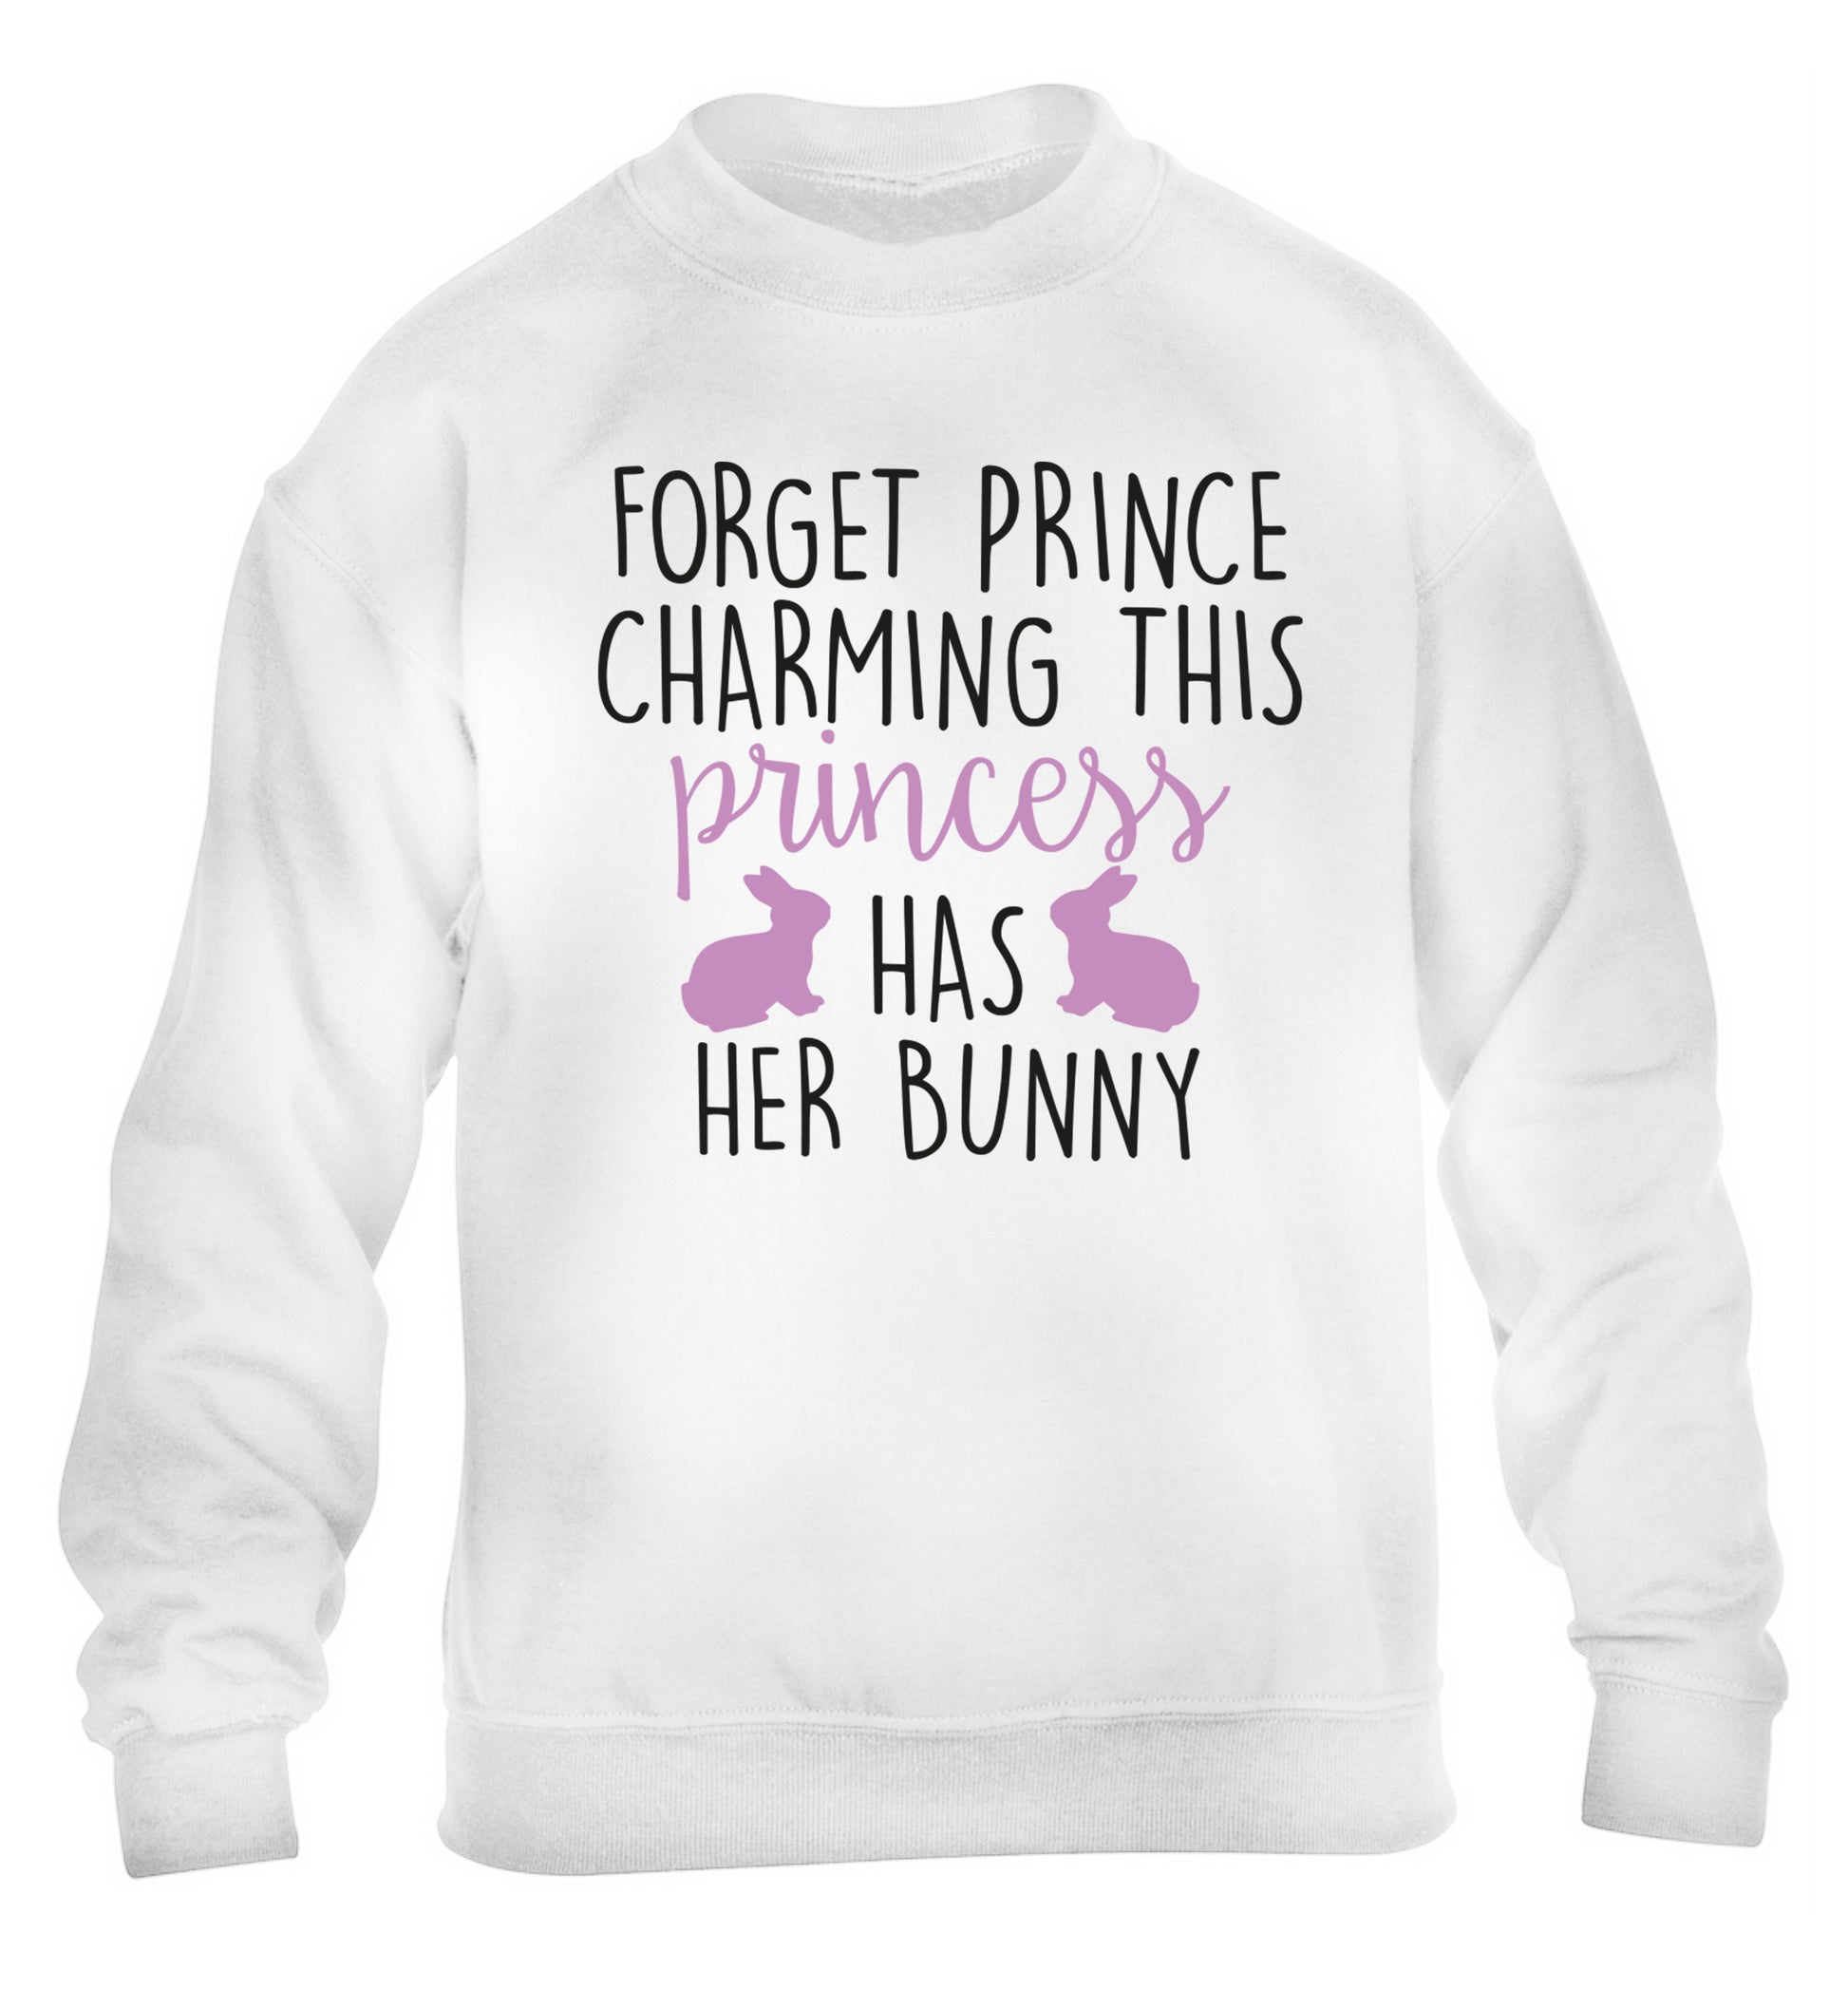 Forget prince charming this princess has her bunny children's white  sweater 12-14 Years